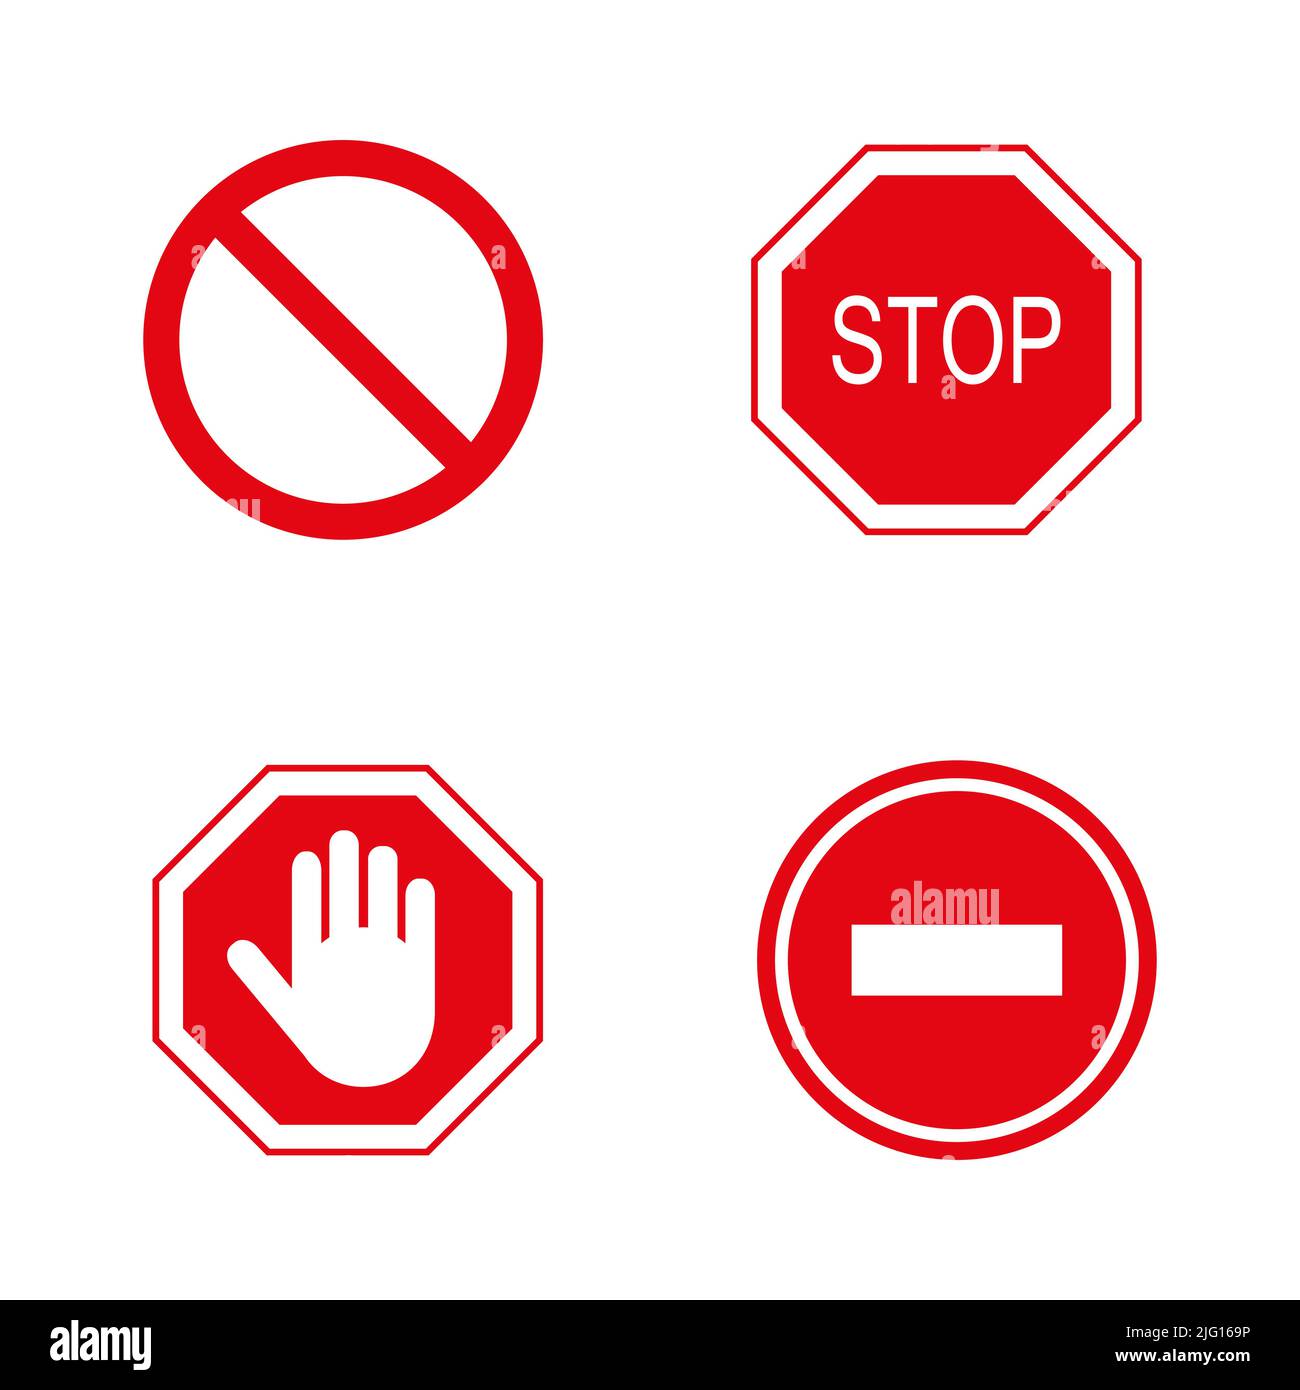 Stop signs vector icon isolated on white background Stock Vector